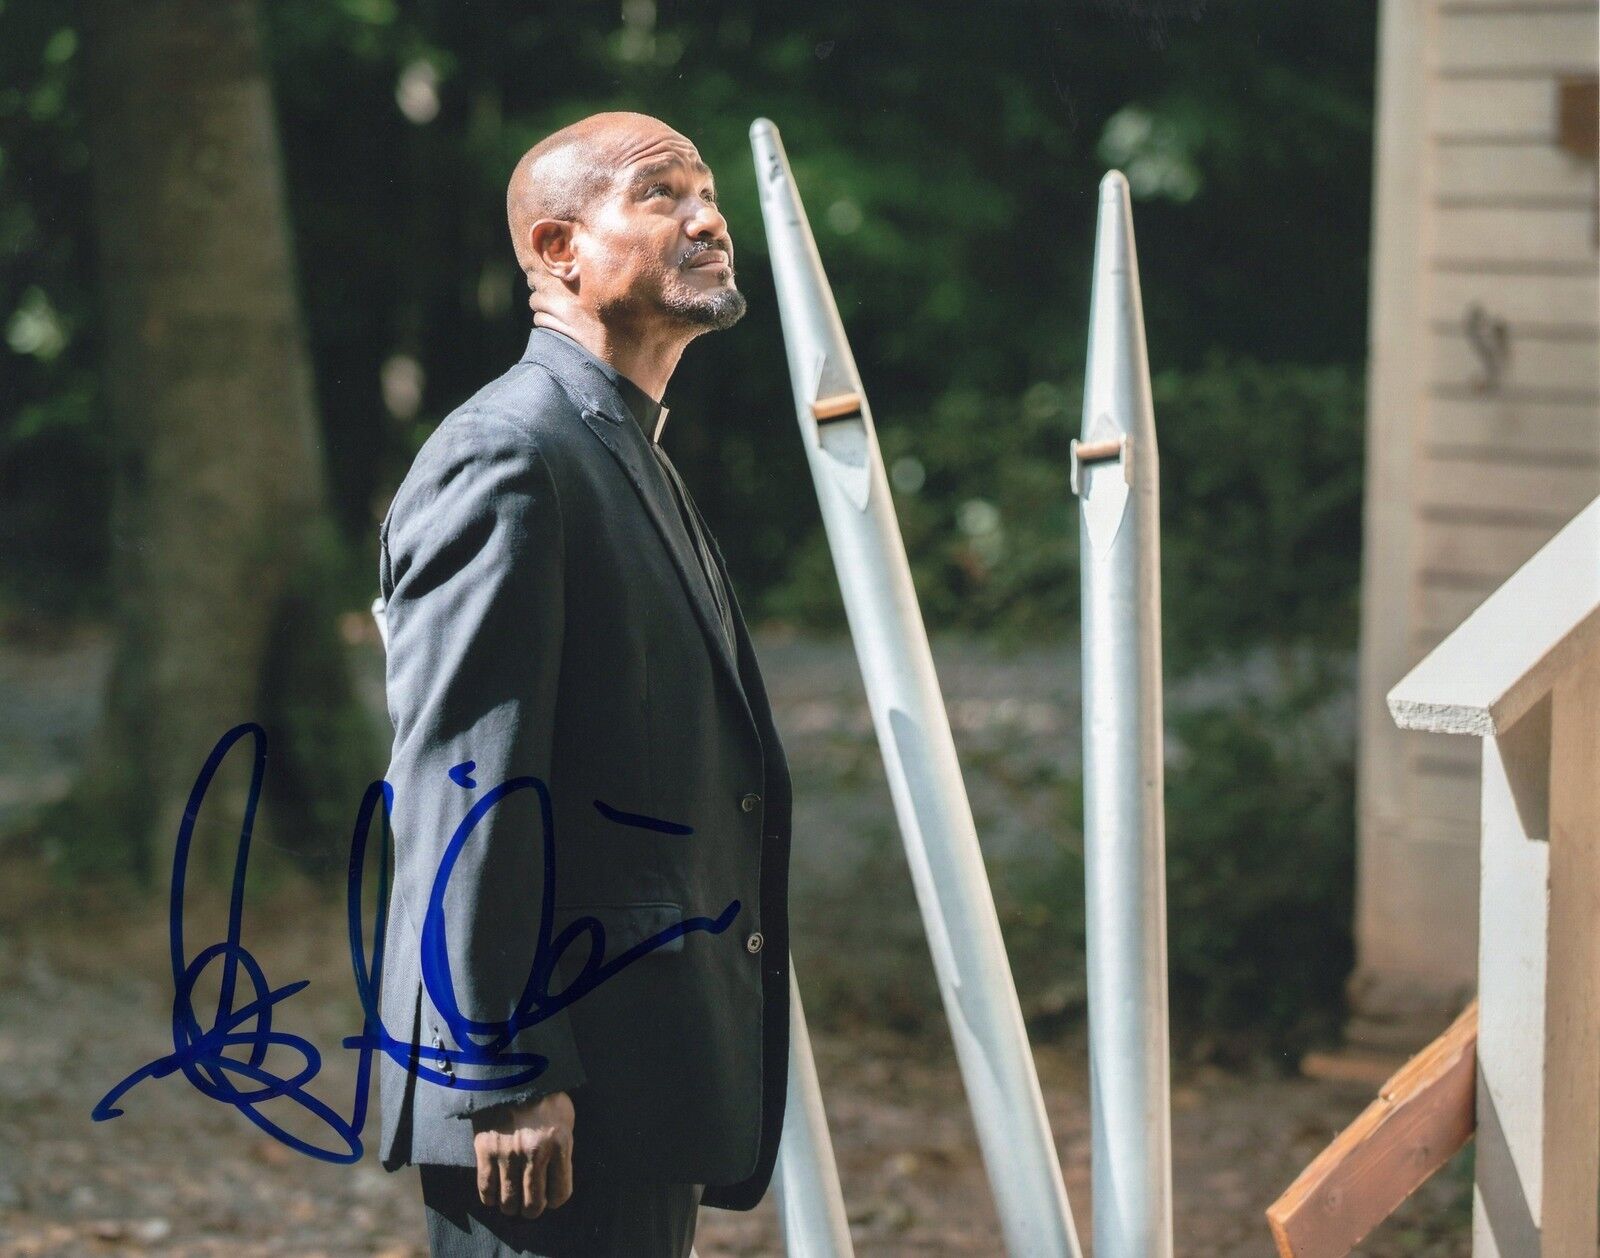 Seth Gilliam The Walking Dead Father Gabriel Stokes Signed 8x10 Photo Poster painting w/COA #1